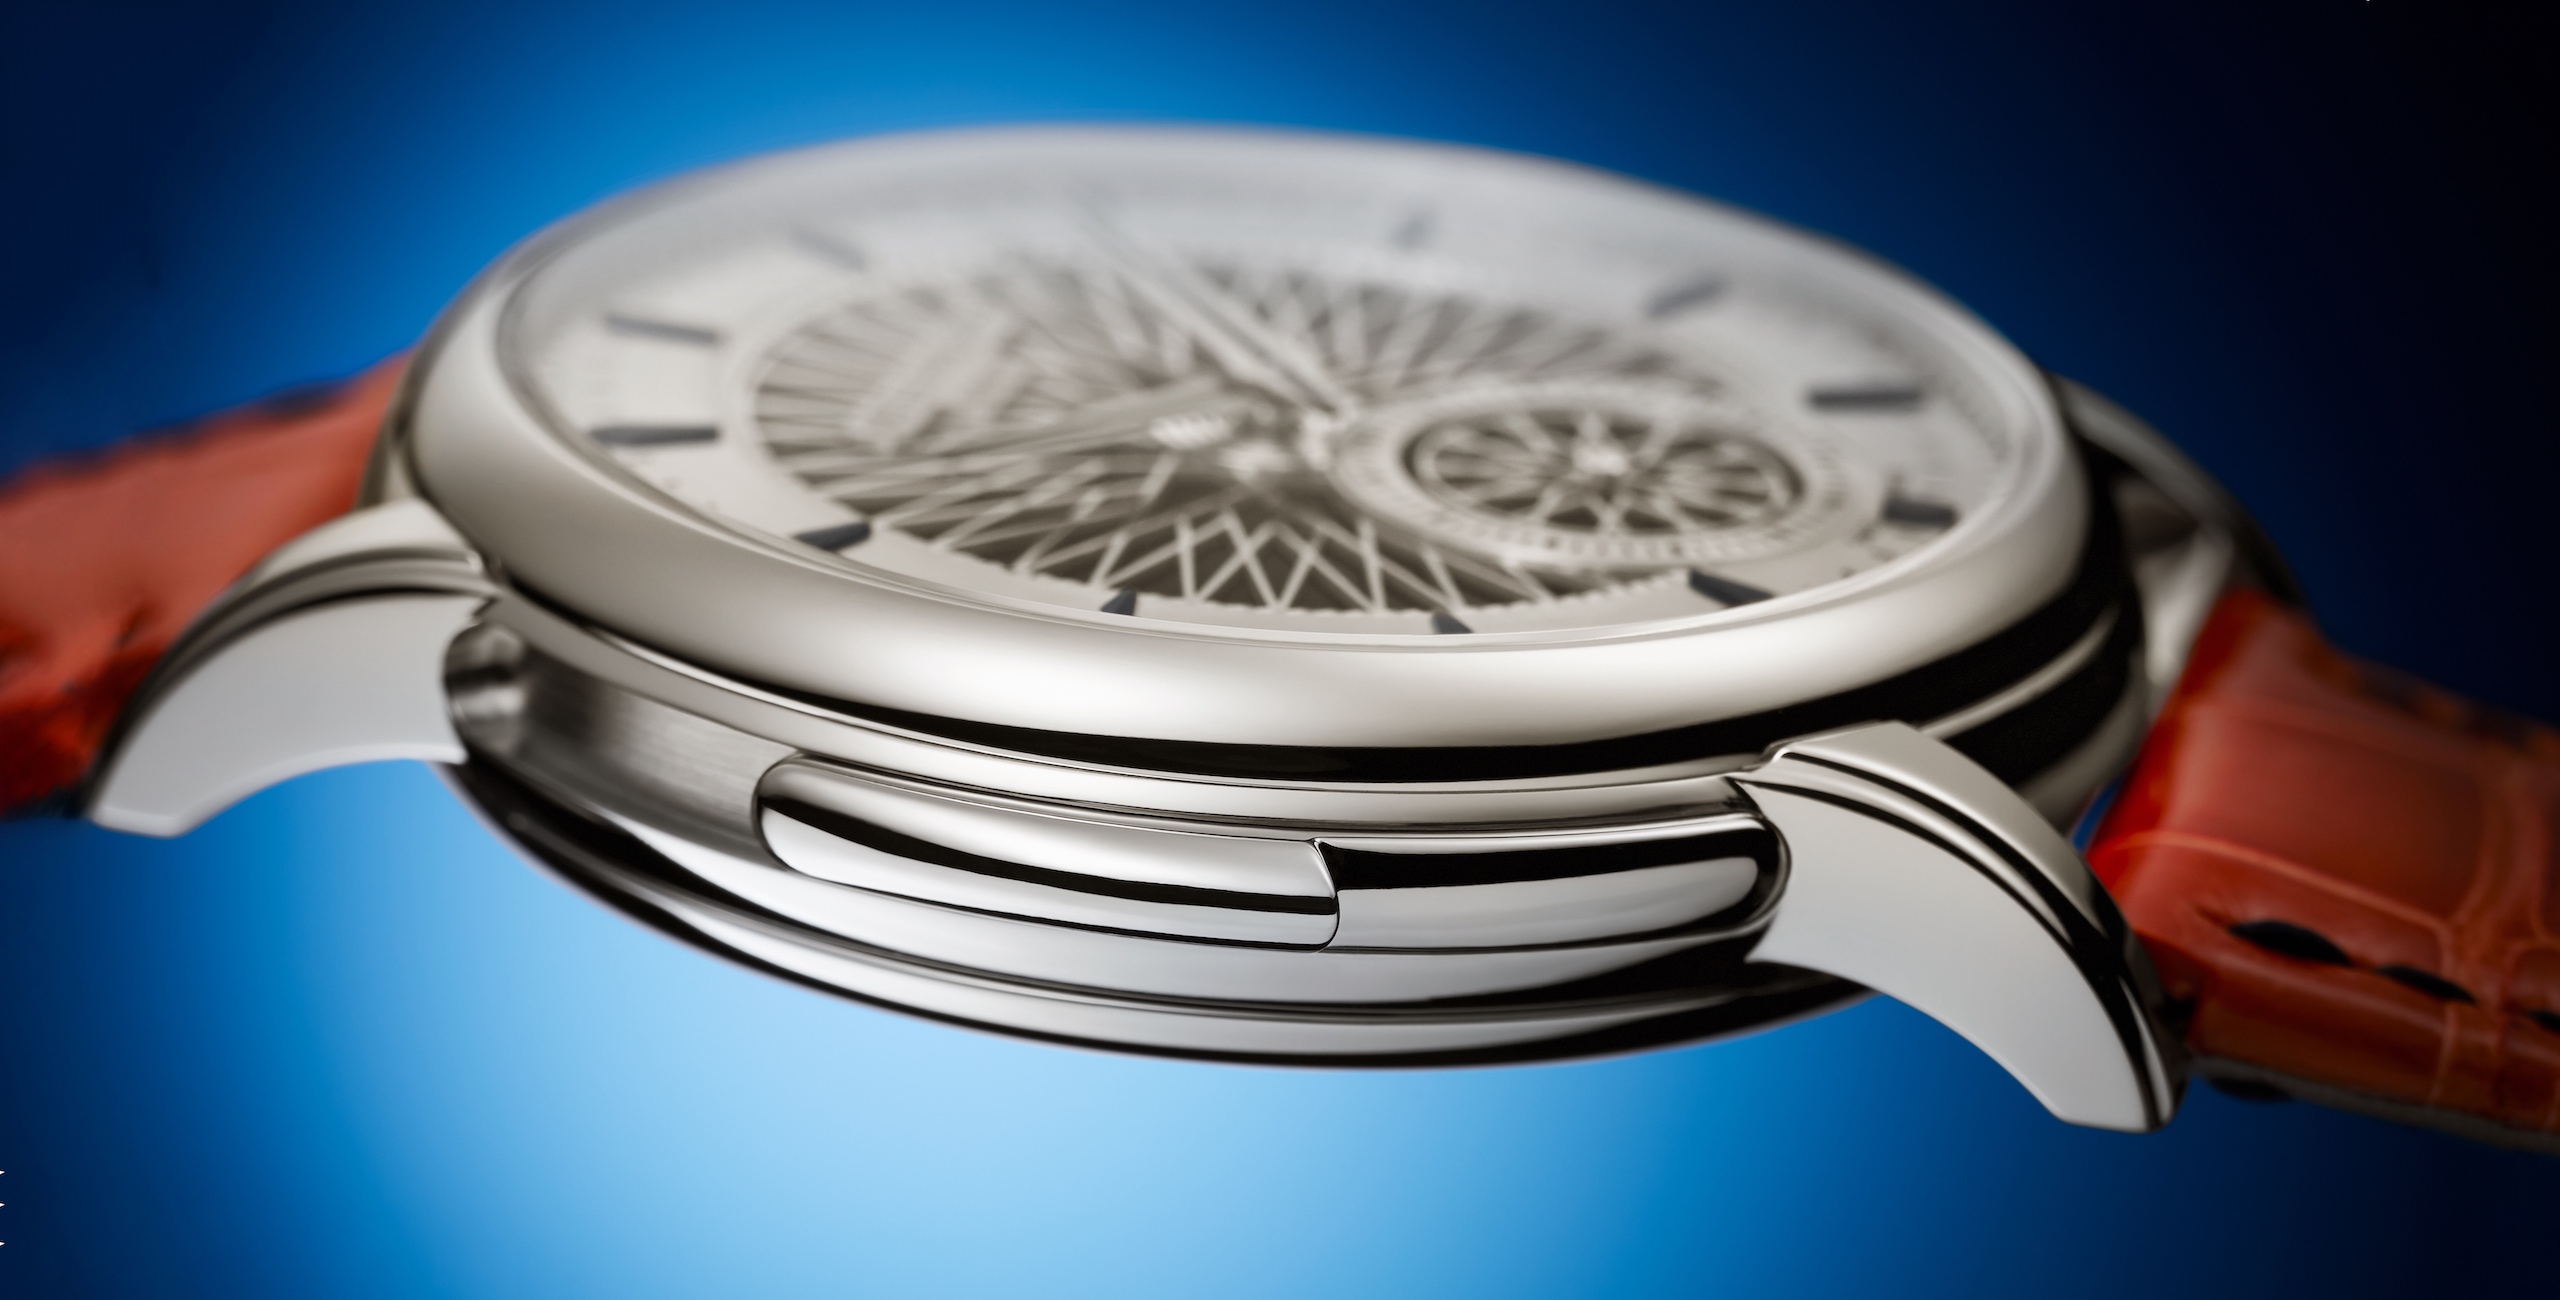 Patek Philippe 5750P "Advanced Research” Fortissimo - cover